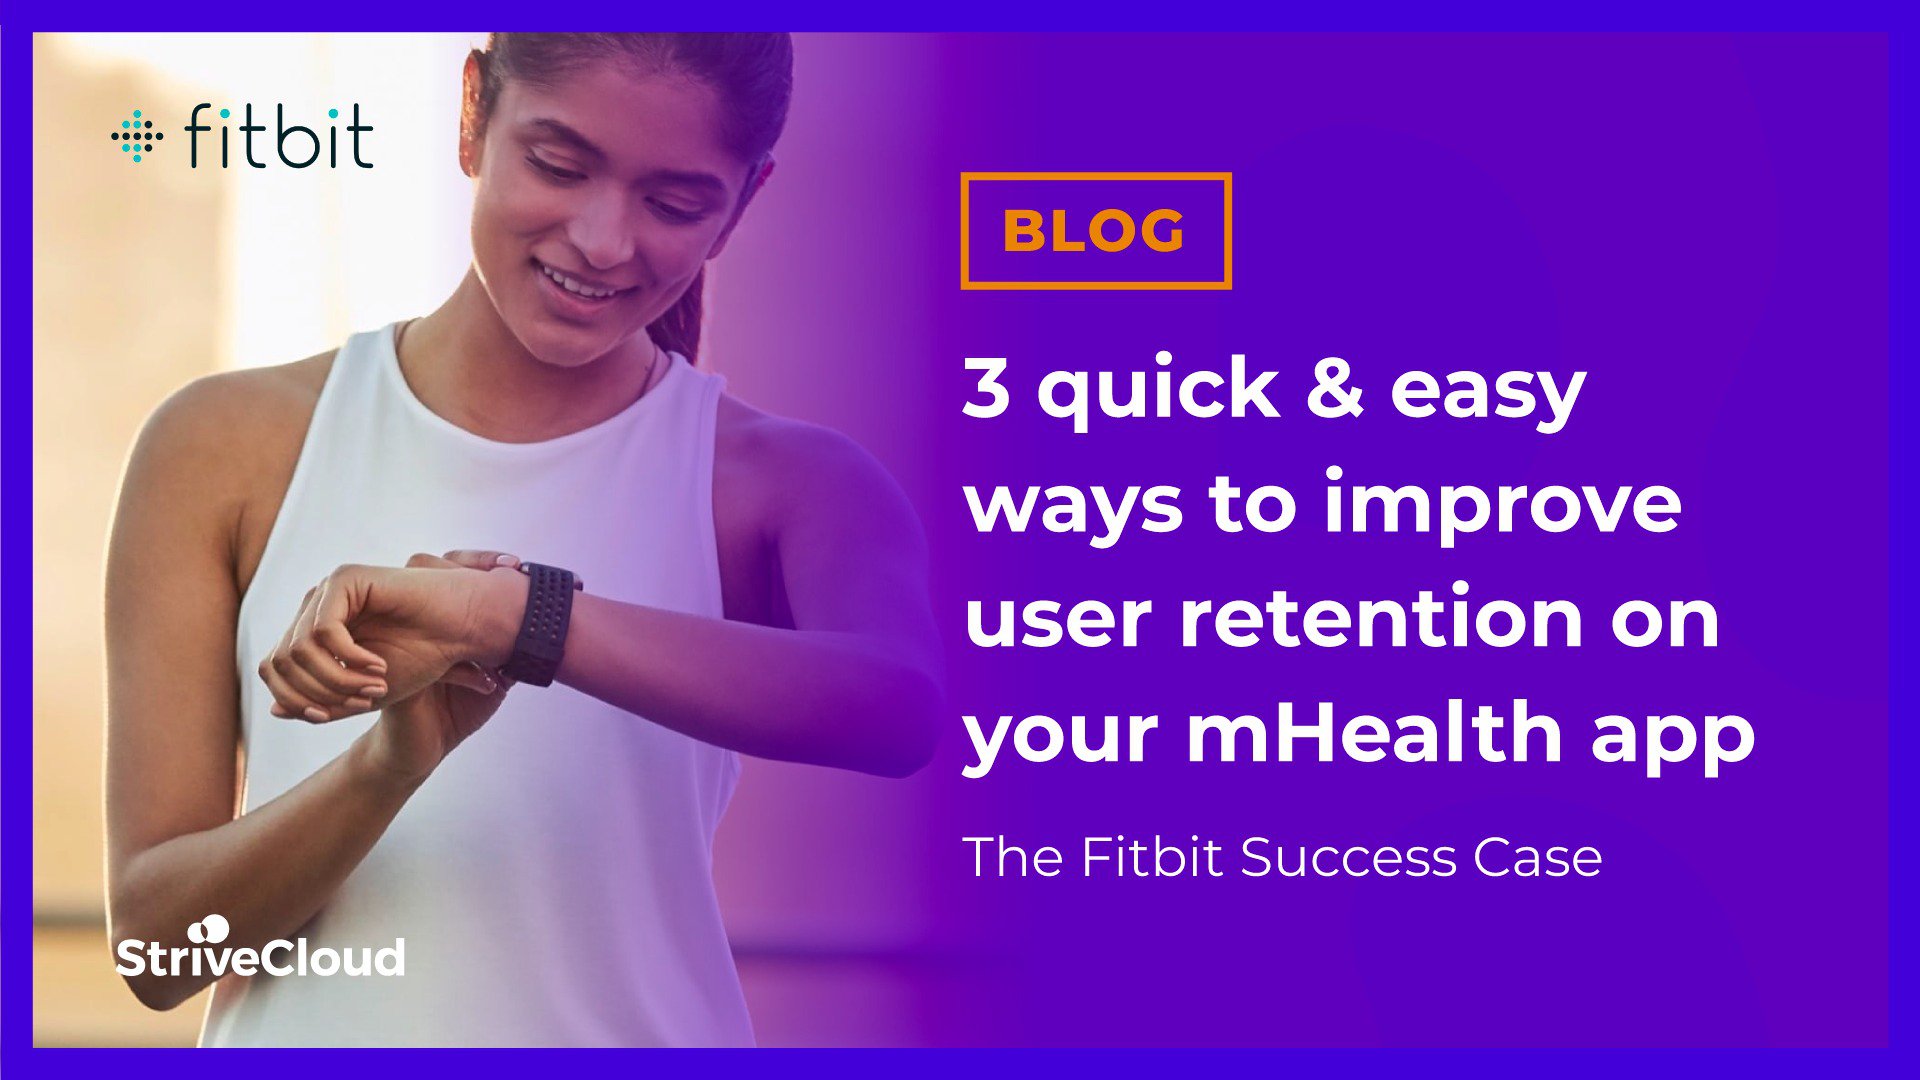 3 quick & easy ways to improve user retention on your mHealth app